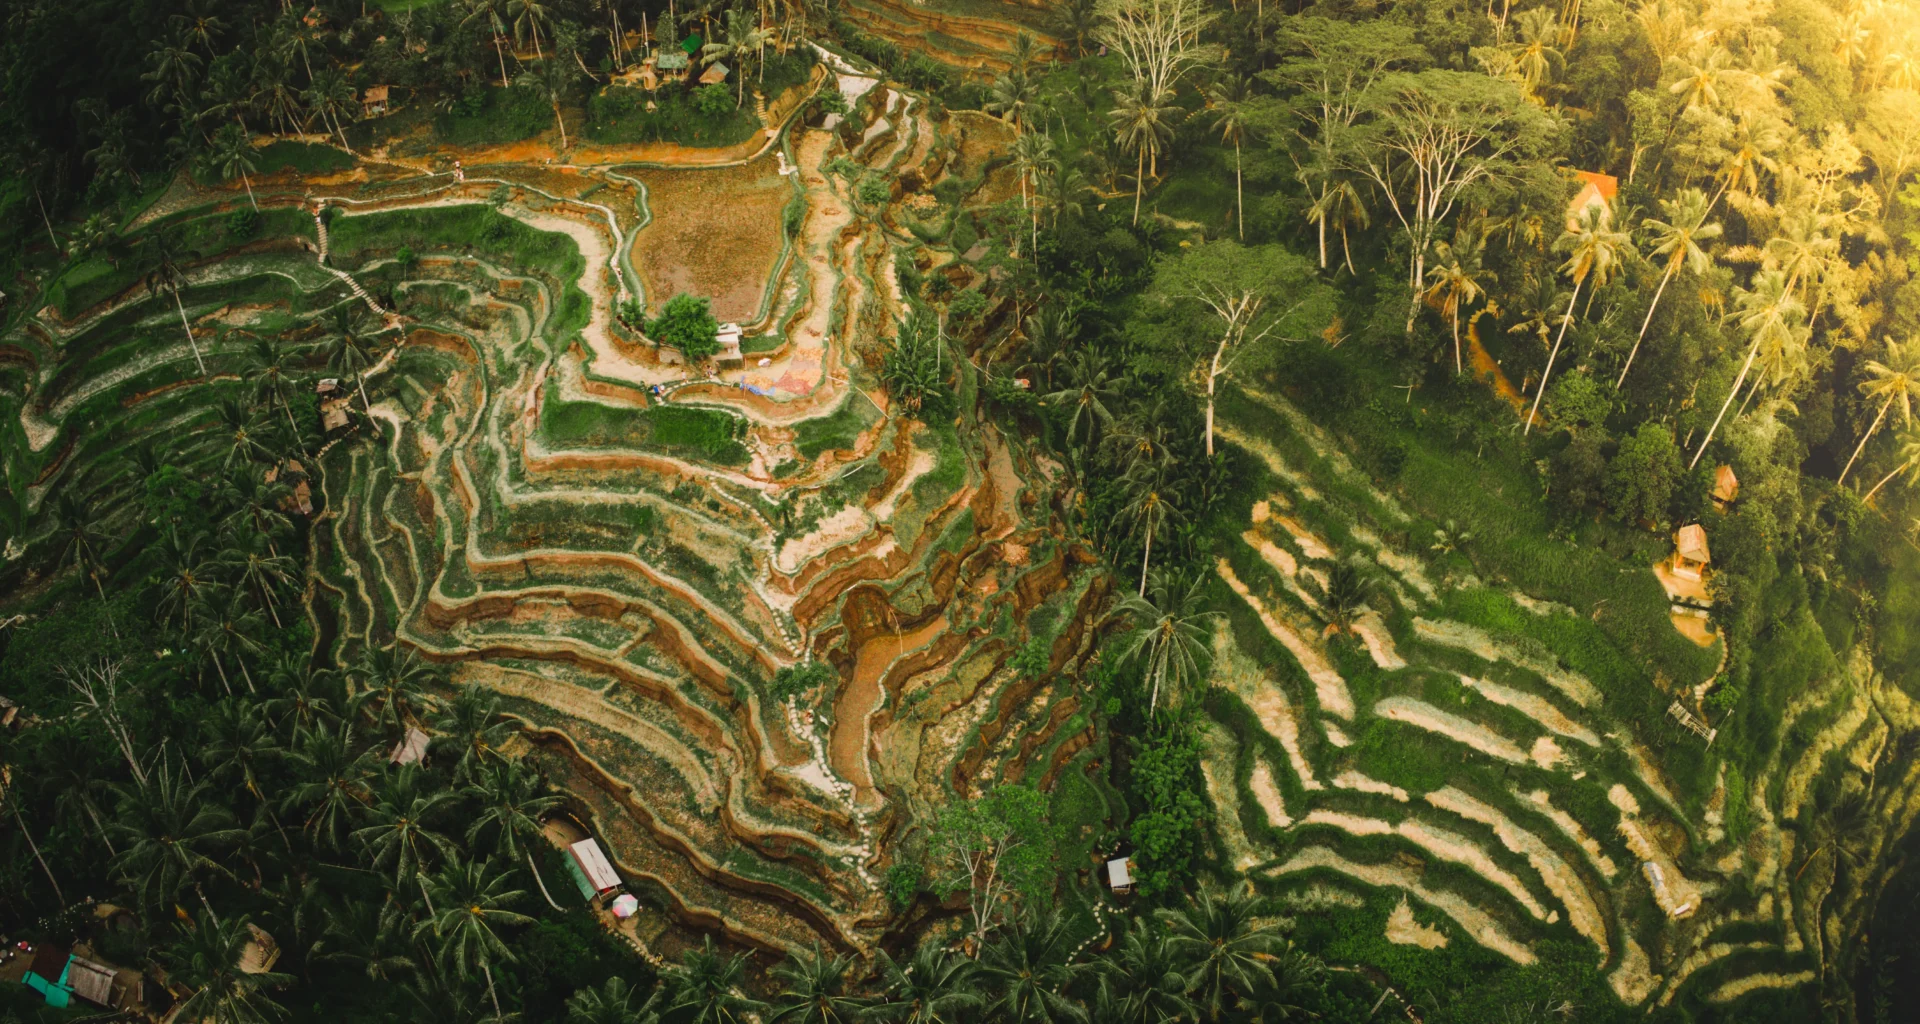 Guide to Tegallalang and Ceking Rice Terrace in Bali, Indonesia